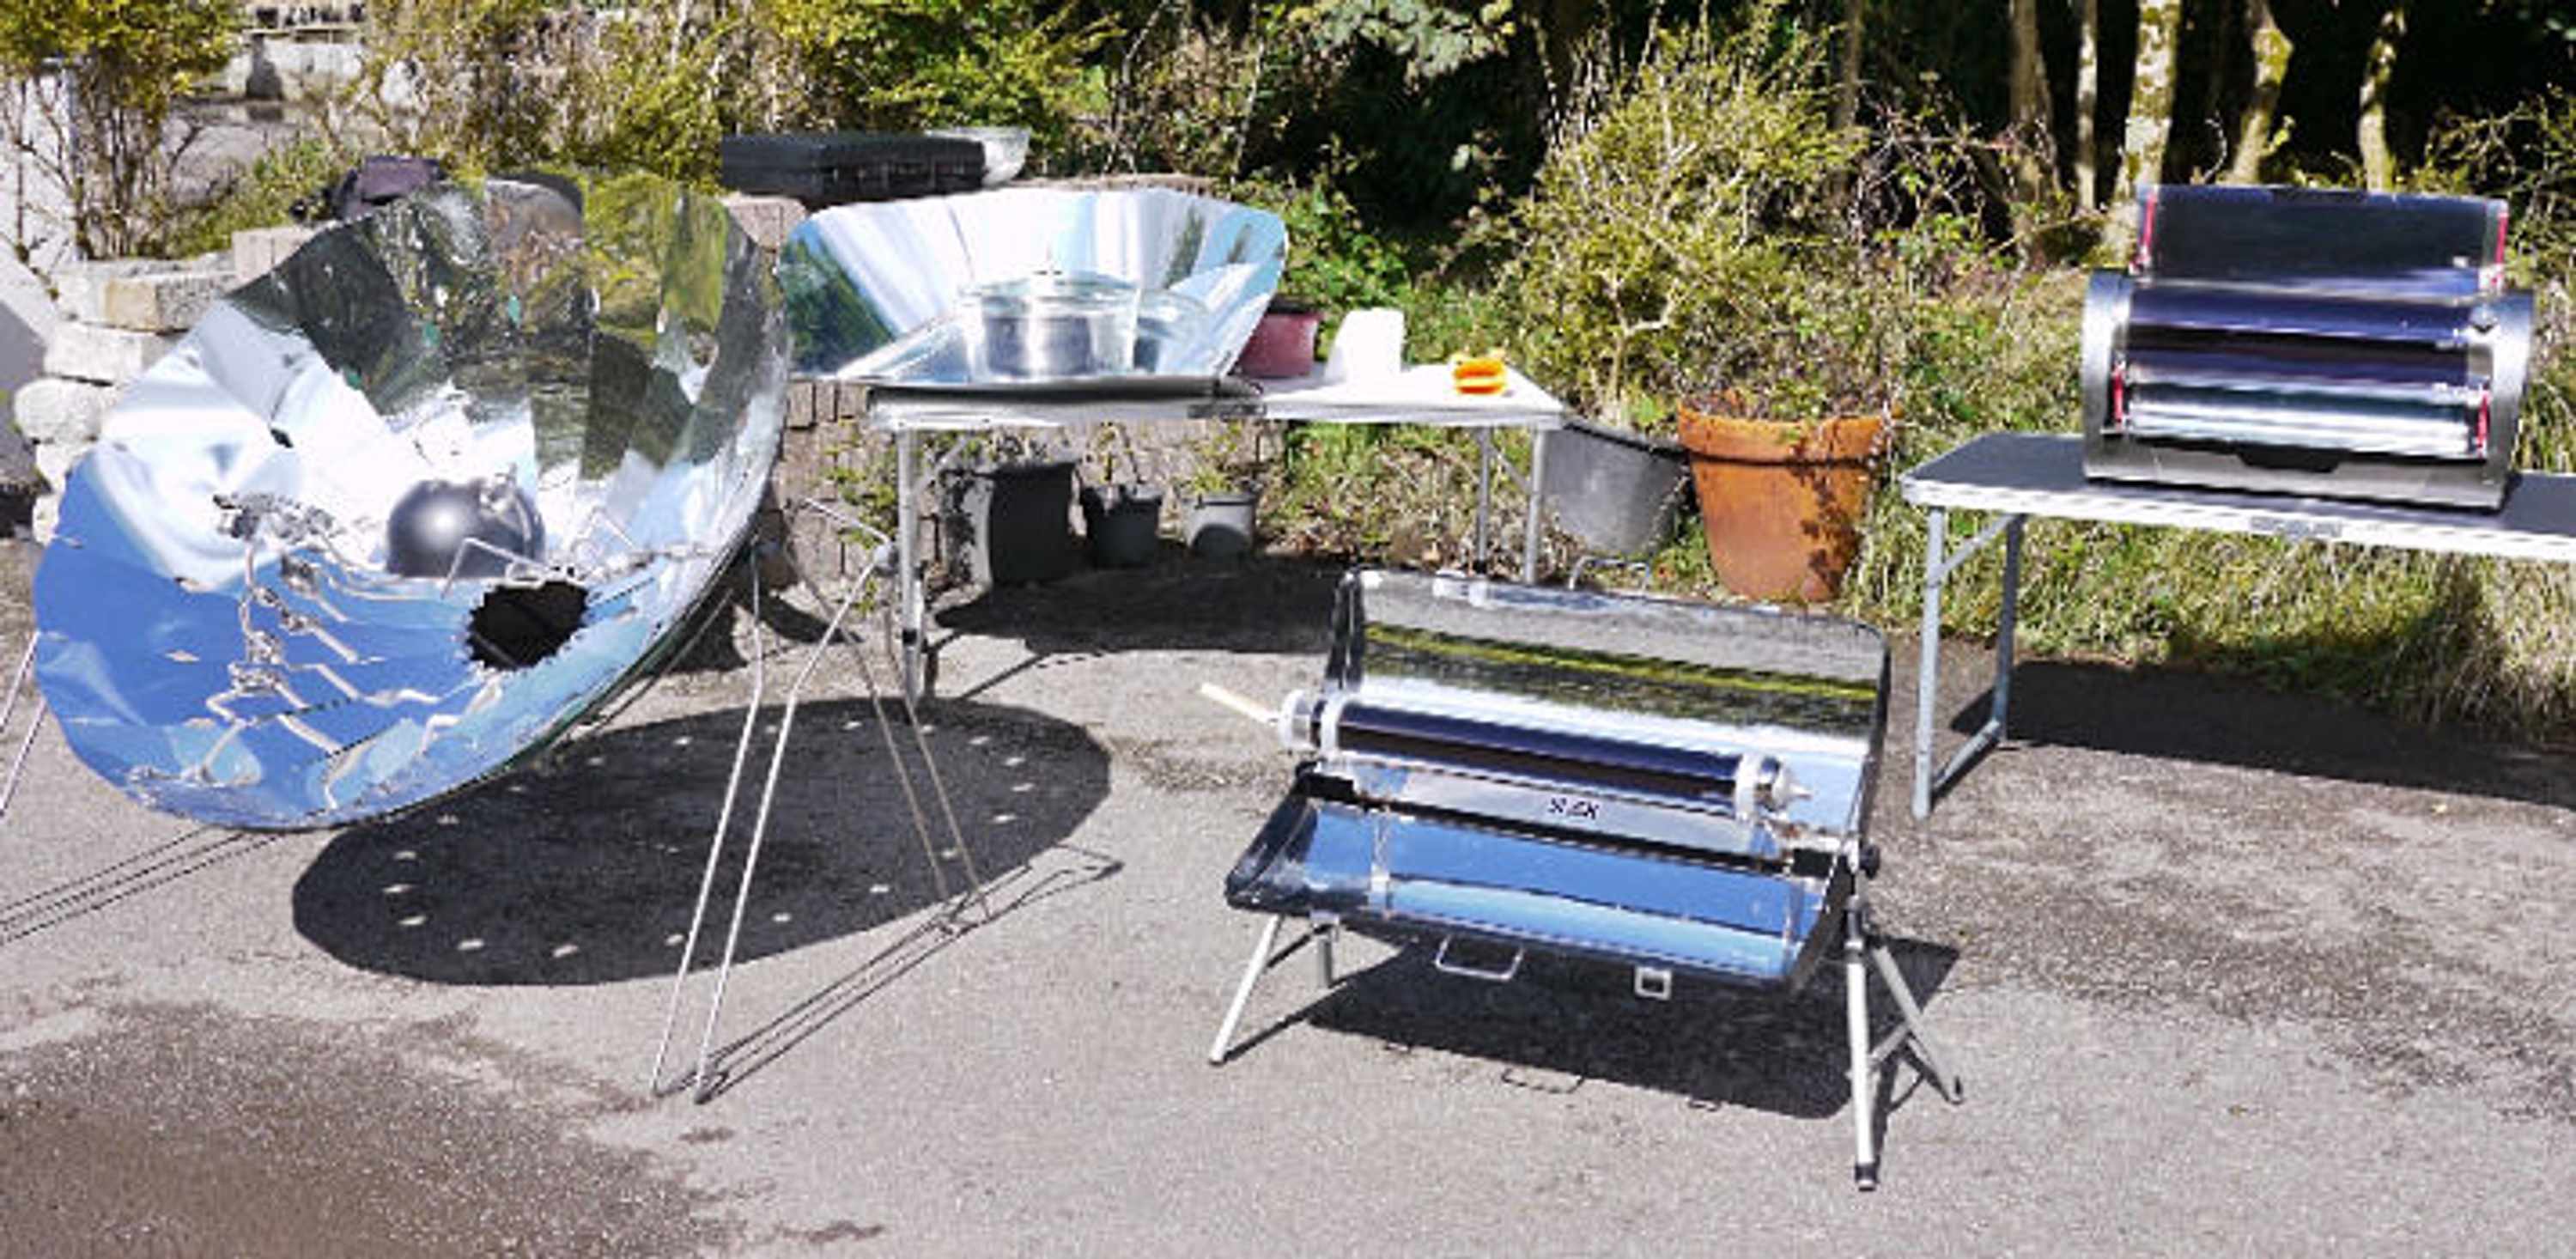 Menagerie of solar cookers